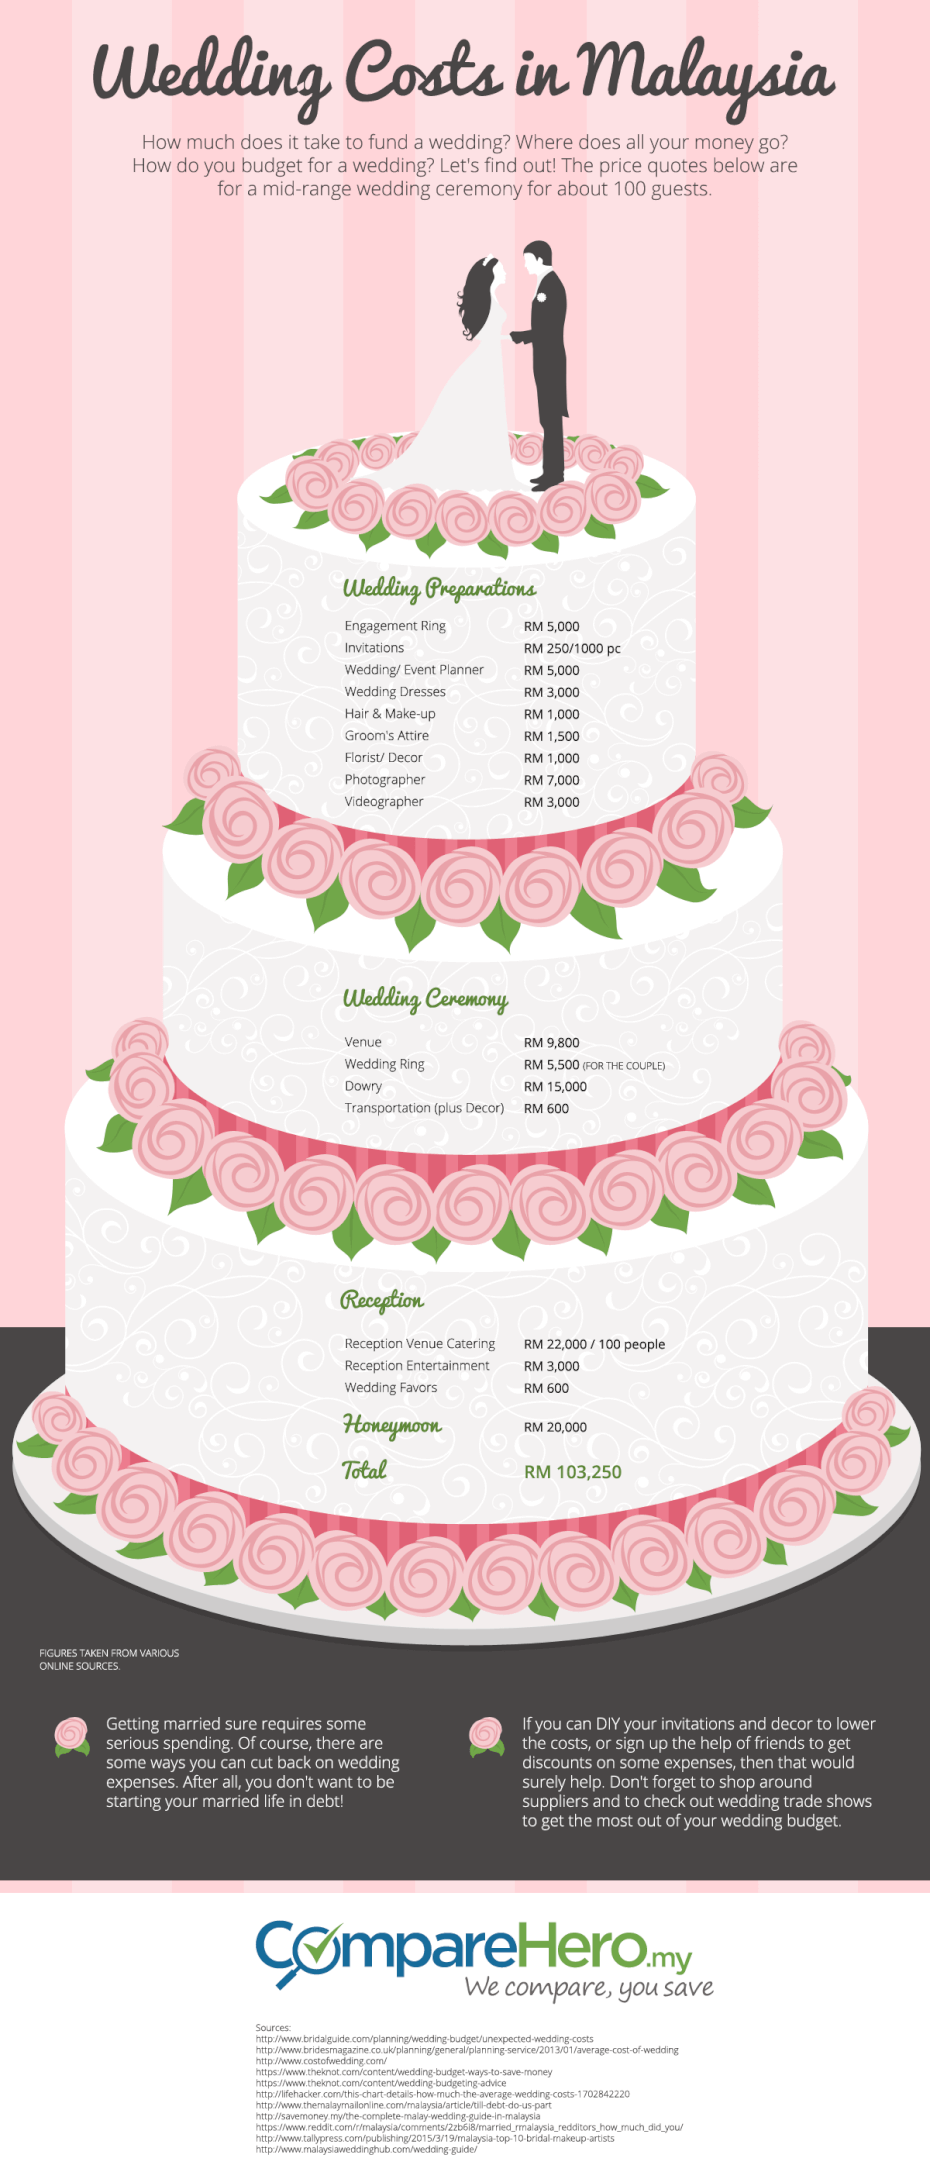 How Much Does a Wedding Really Cost?